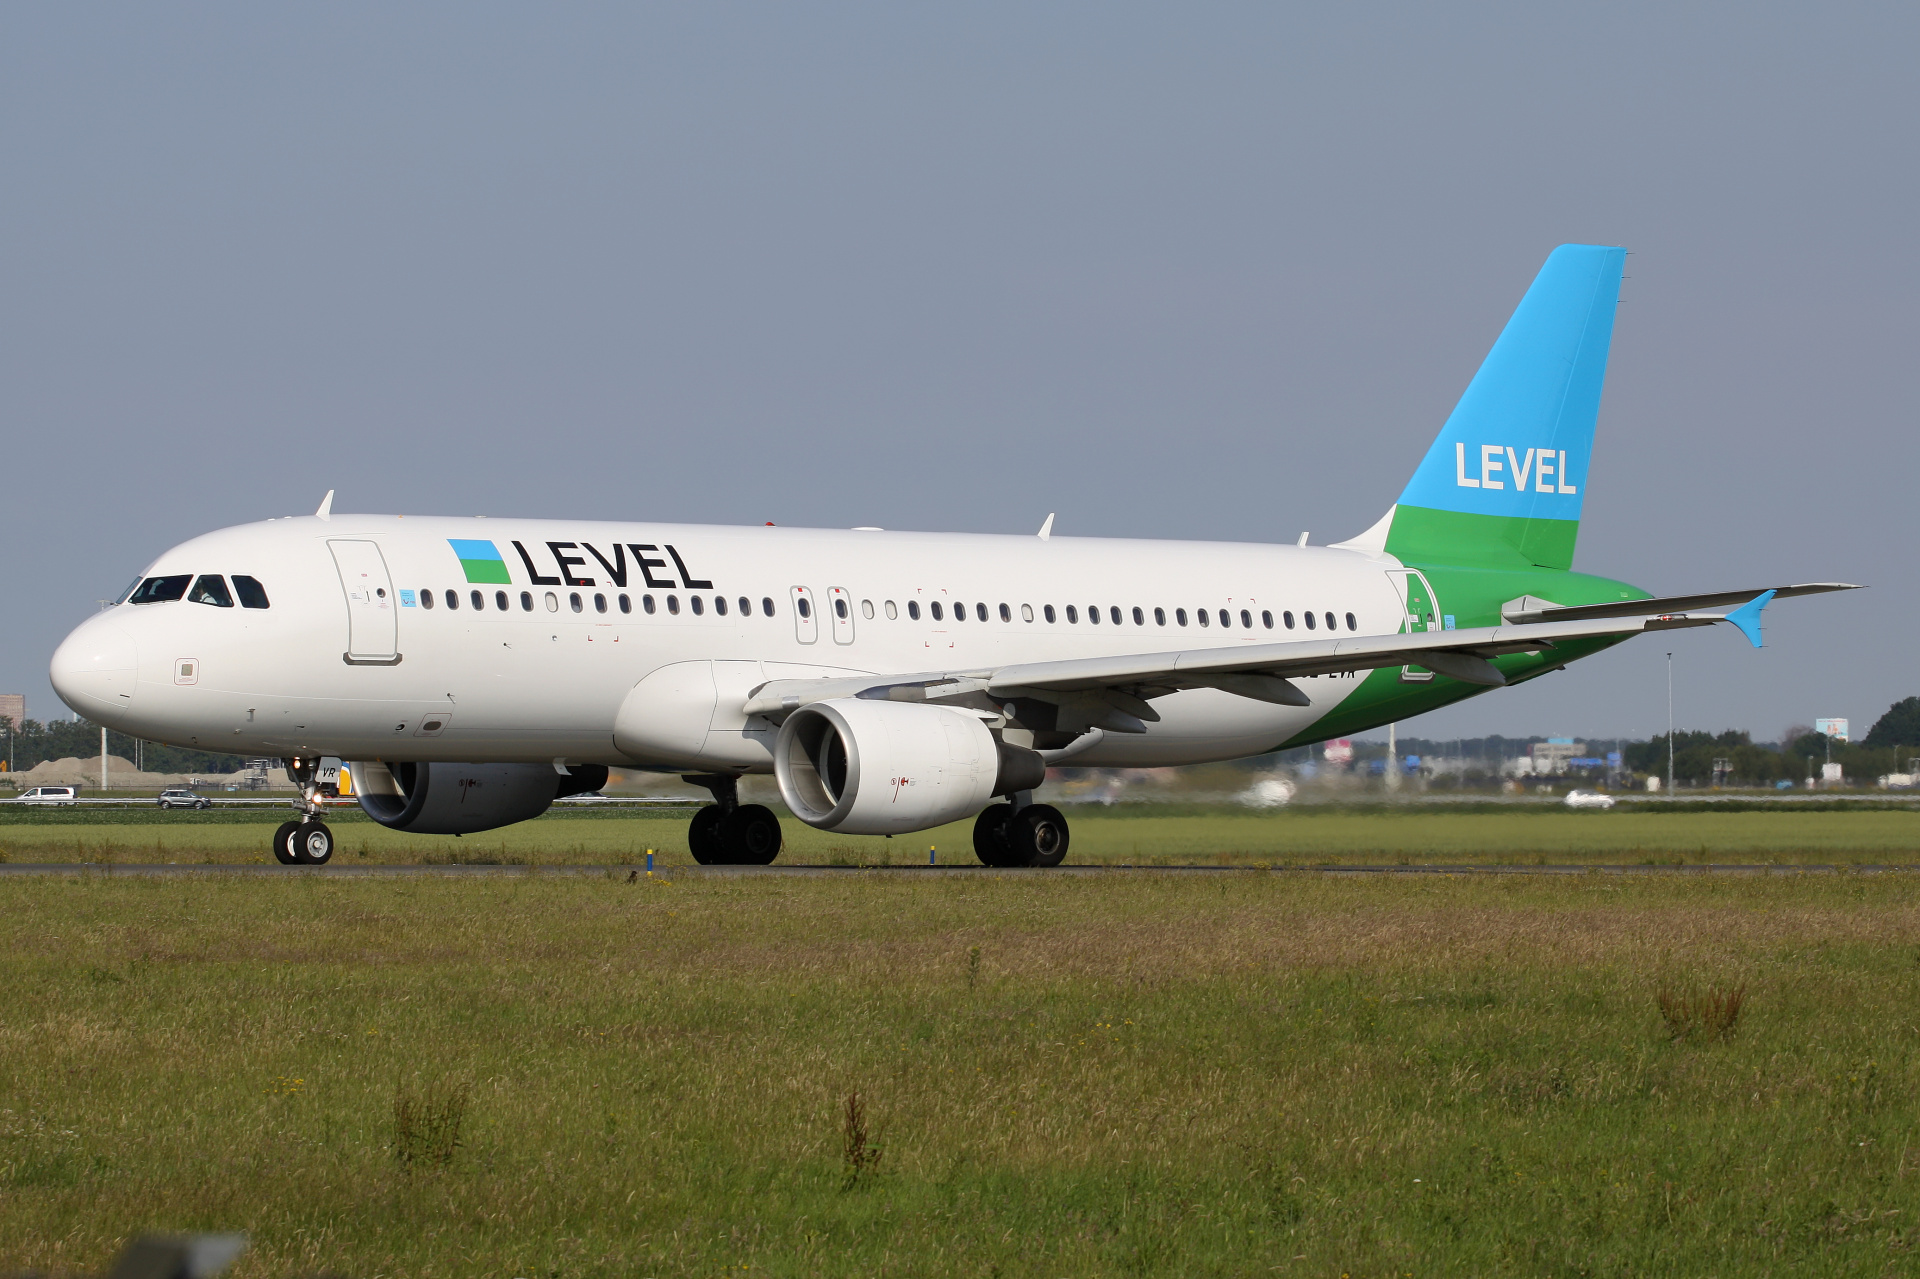 OE-LVR, Level (Aircraft » Schiphol Spotting » Airbus A320-200)